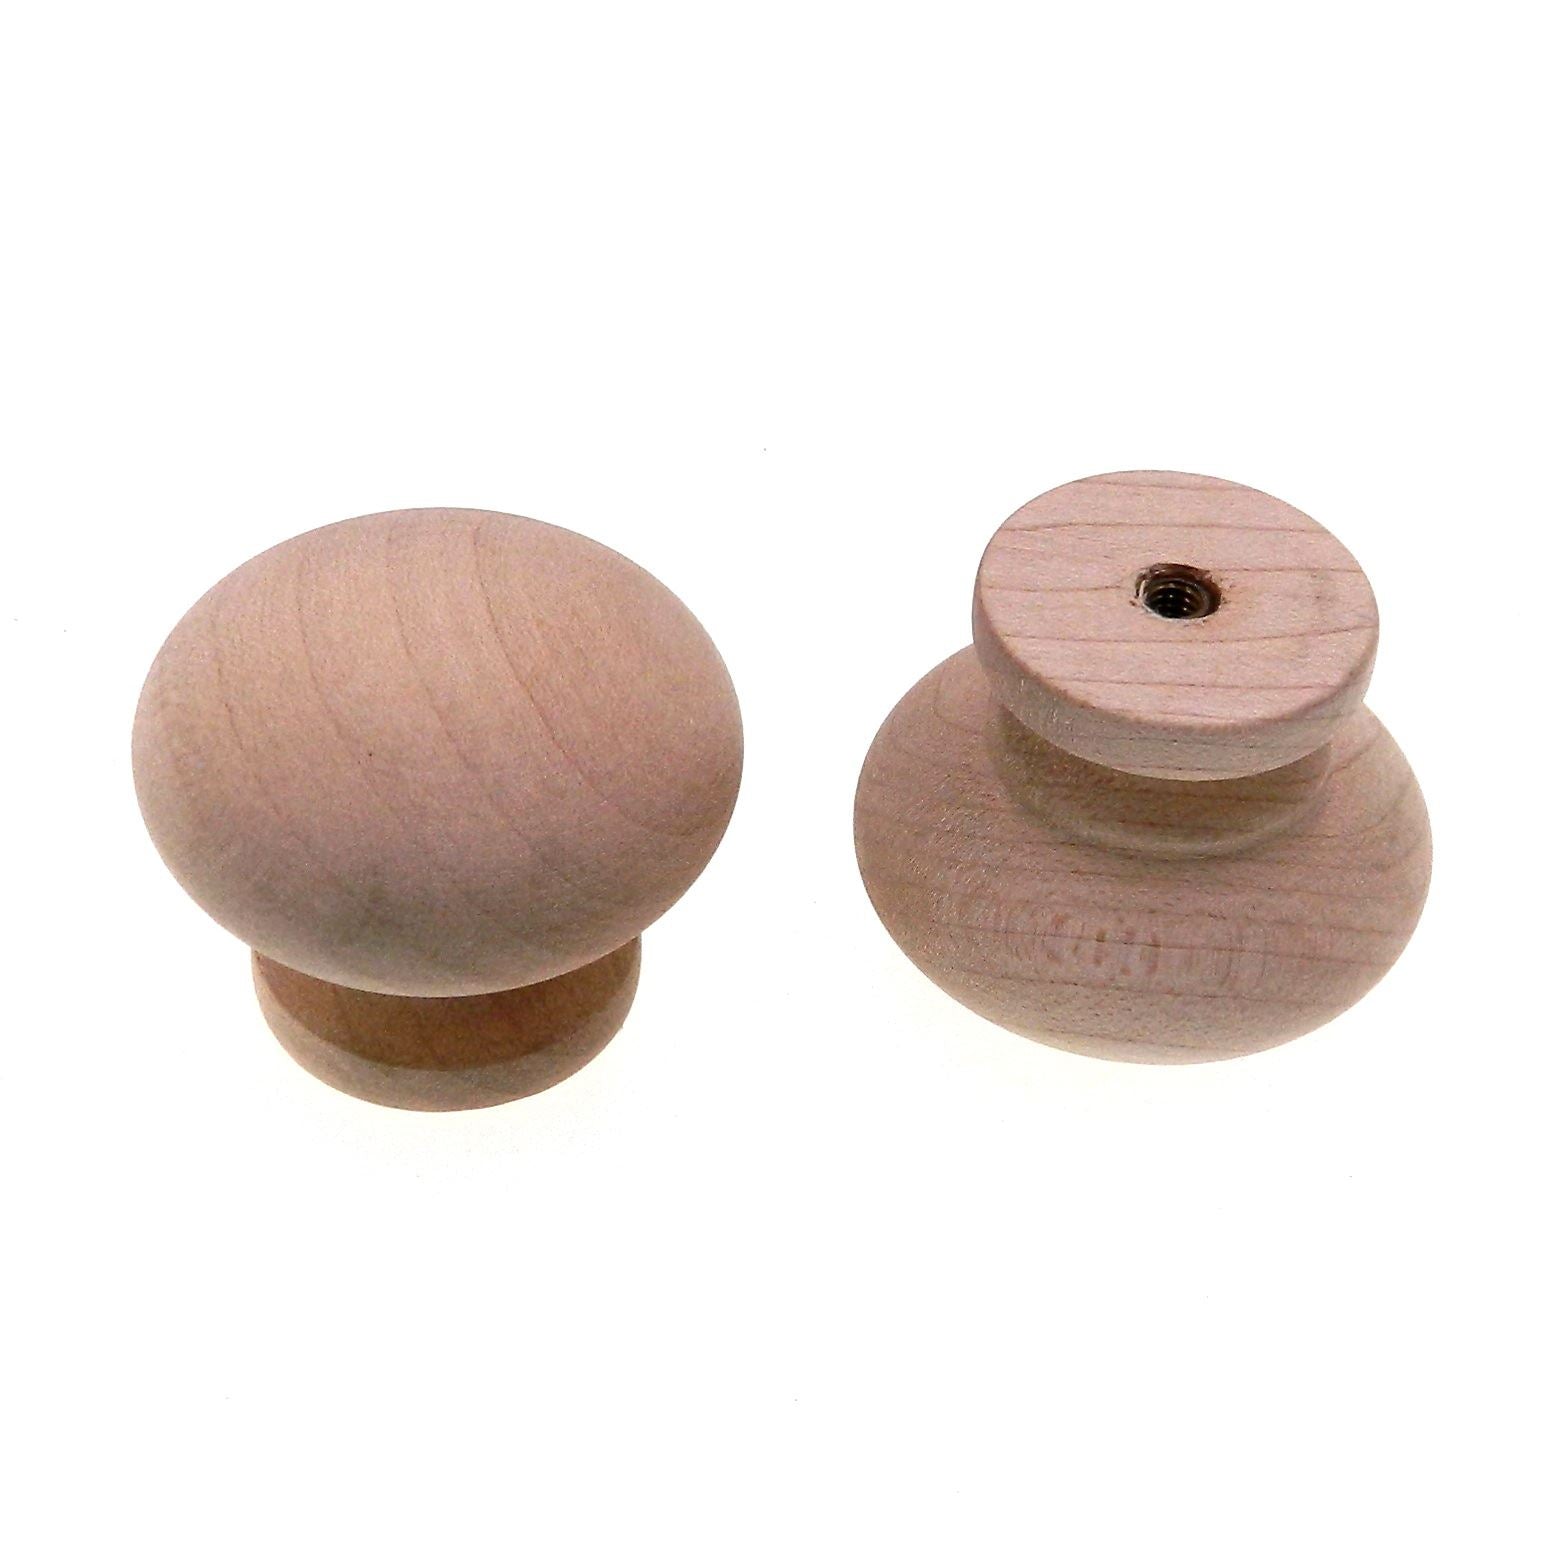 Pair of Amerock Maple Wood 1 1/2" Round Cabinet Knobs Unfinished BP880-WDMA